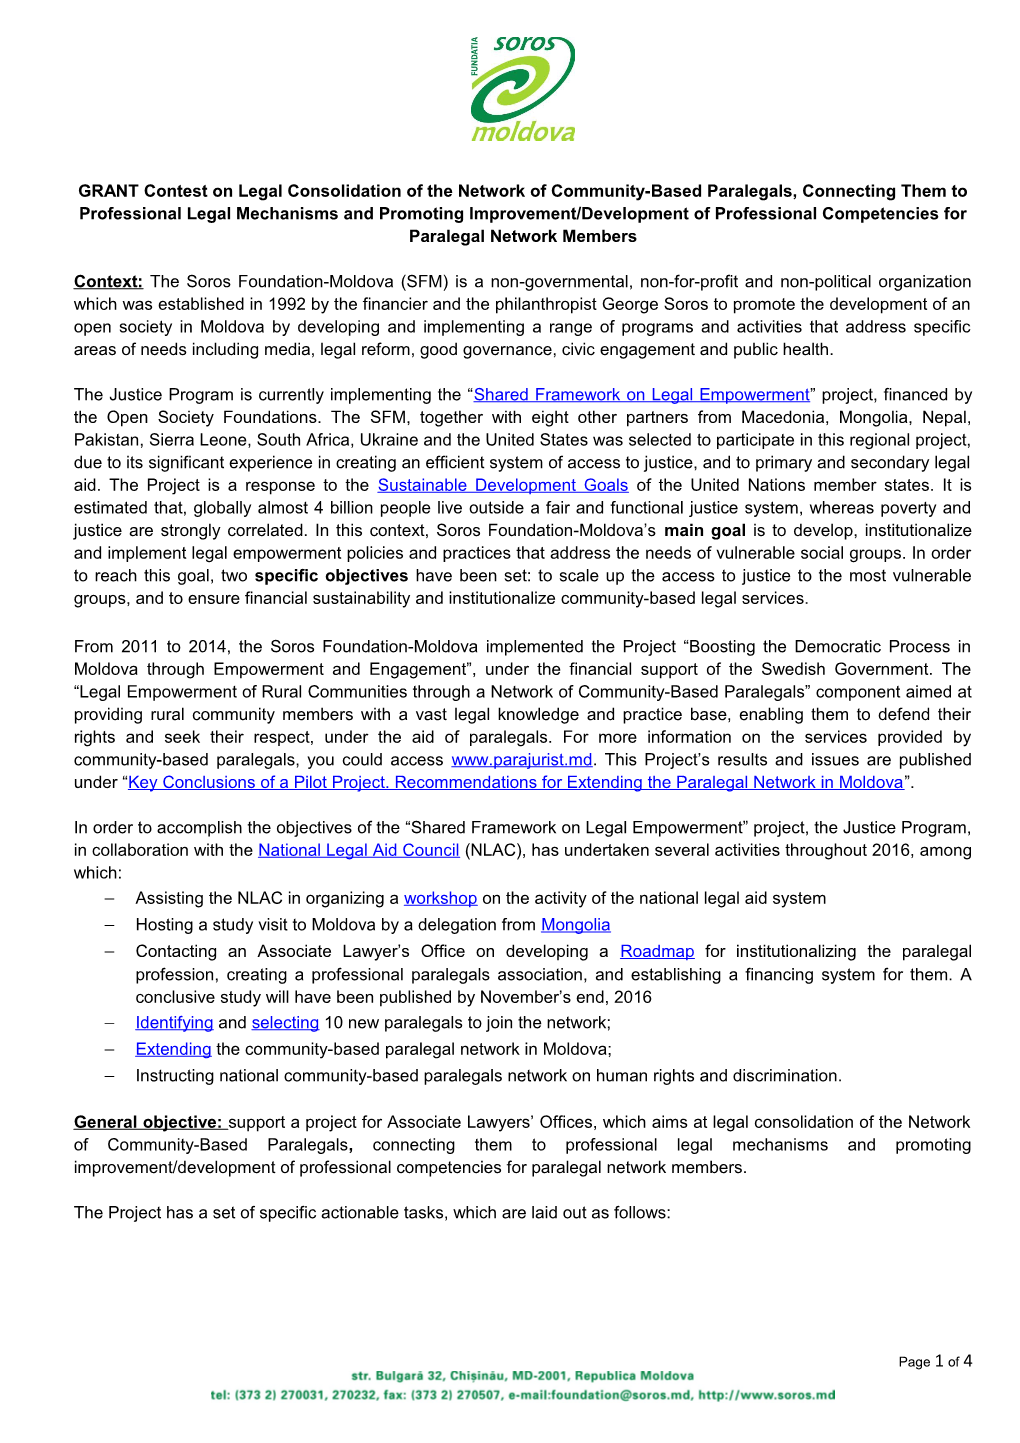 GRANT Contest on Legal Consolidation of the Network of Community-Based Paralegals, Connecting